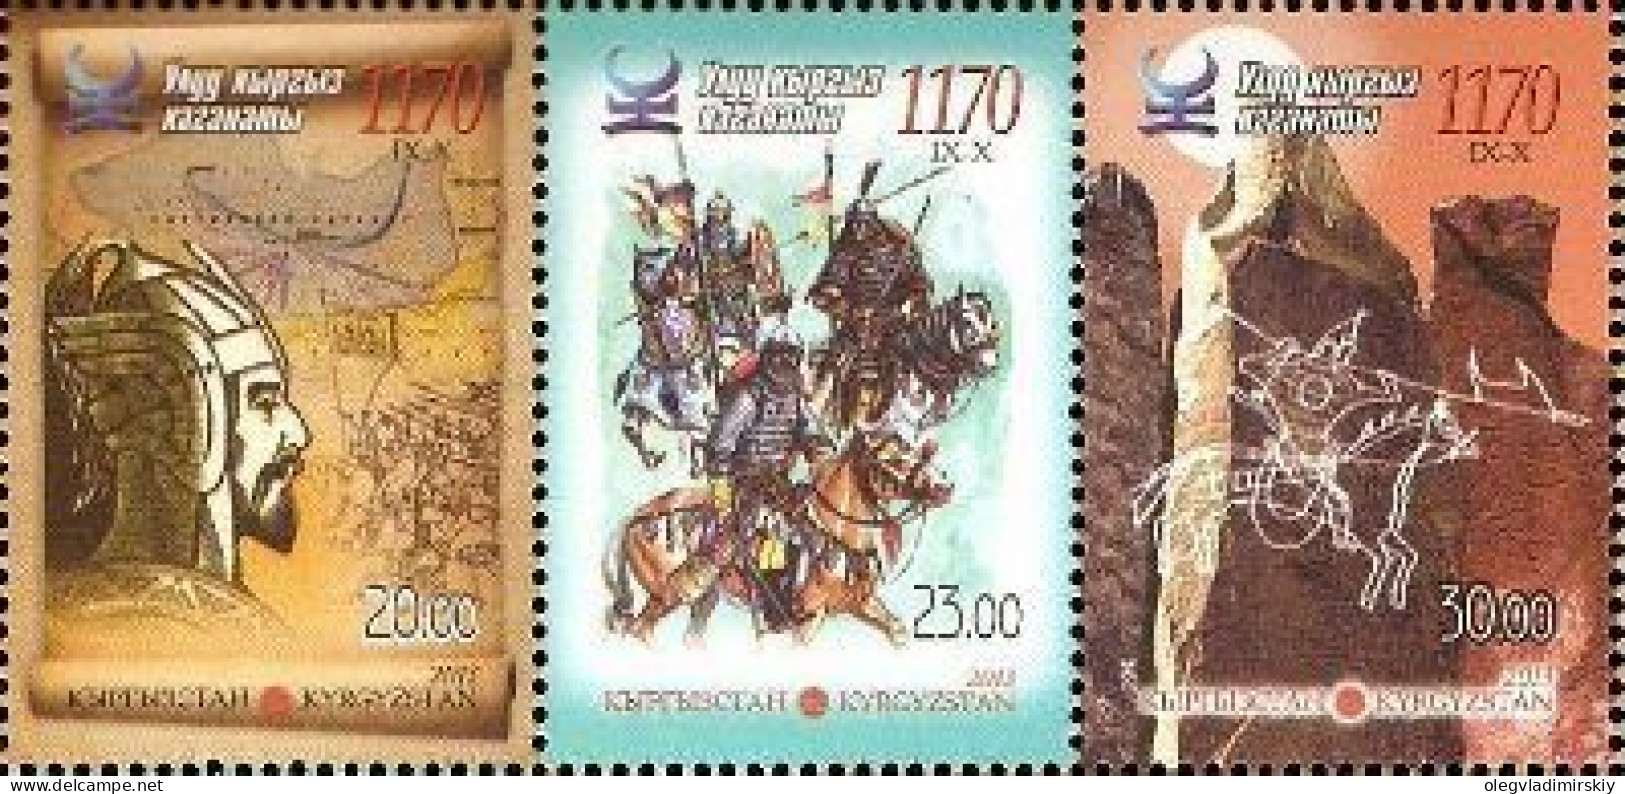 Kyrgyzstan 2013 Great Kyrgyz Kaganate 1170 Years Set Of 3 Stamps In Strip MNH - Archéologie